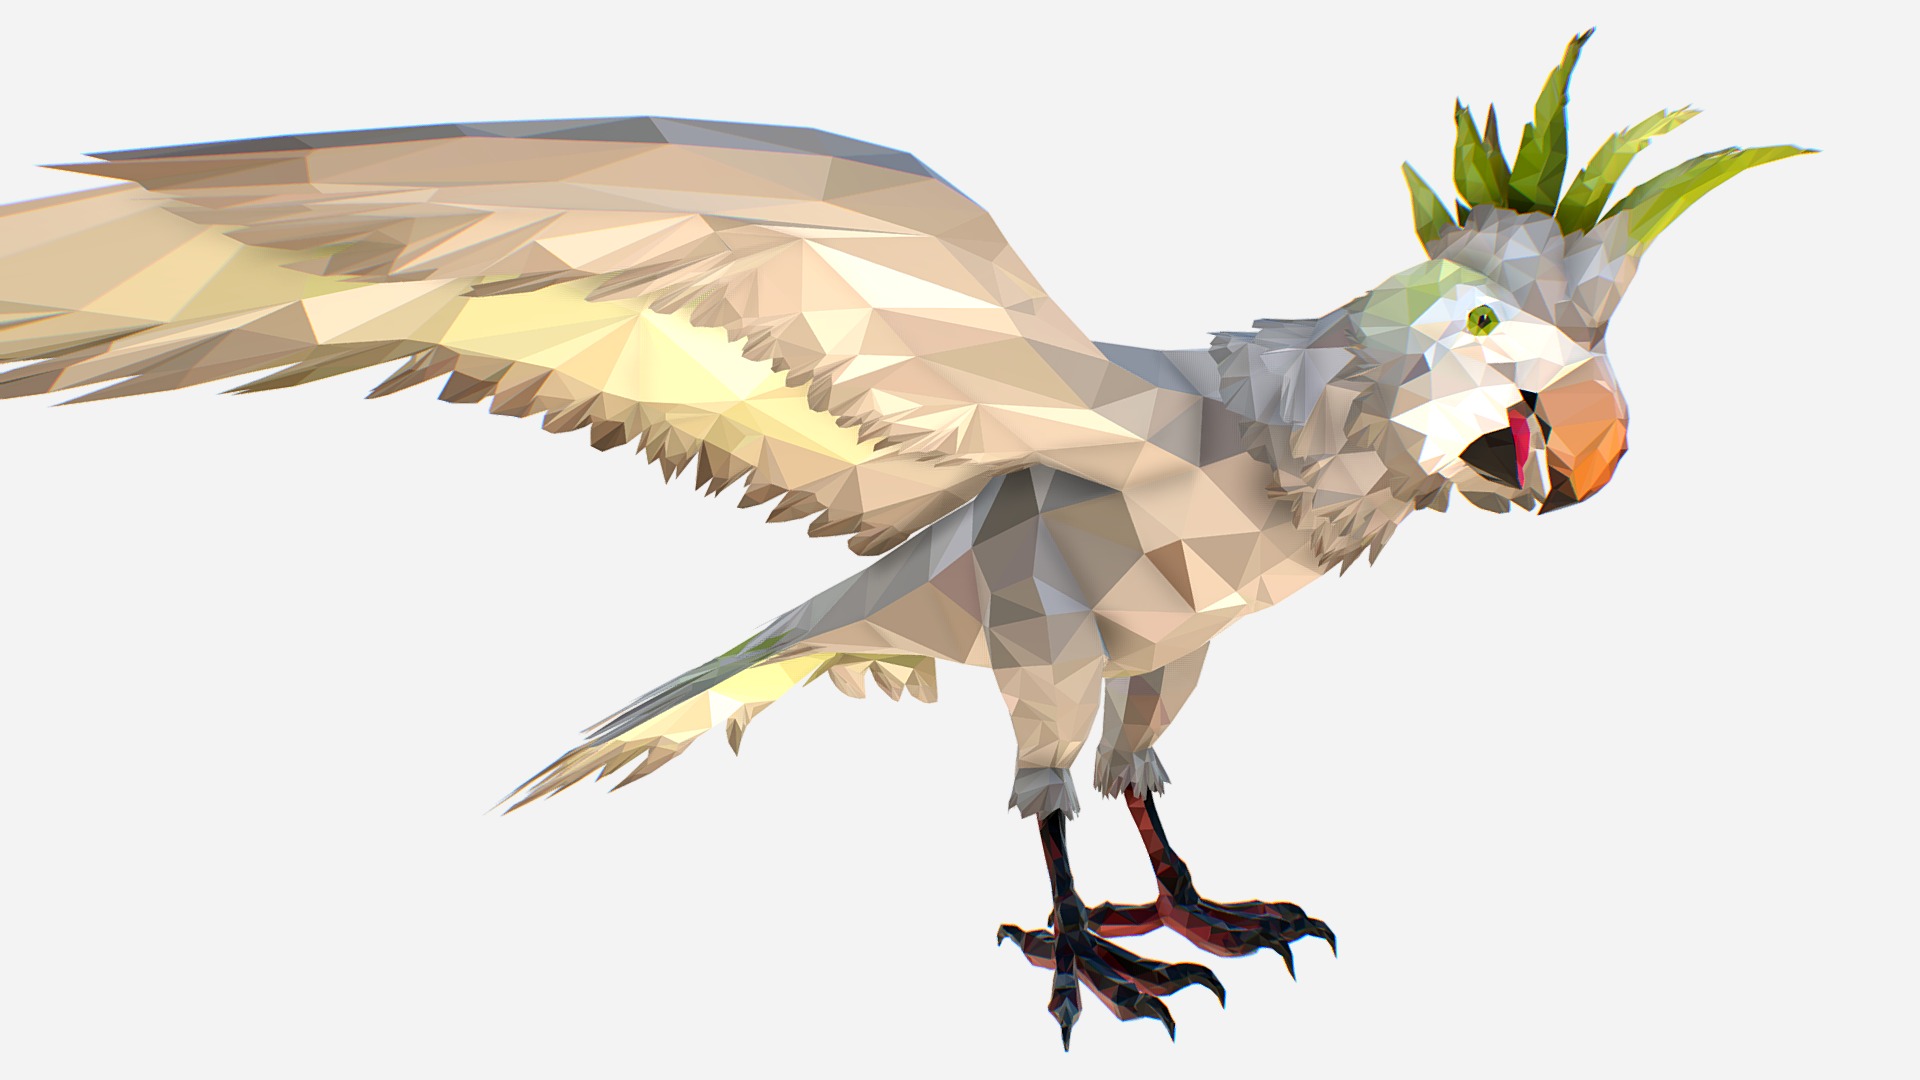 3D model Low Poly art Parrot Bird - This is a 3D model of the Low Poly art Parrot Bird. The 3D model is about a bird with a plant on its head.